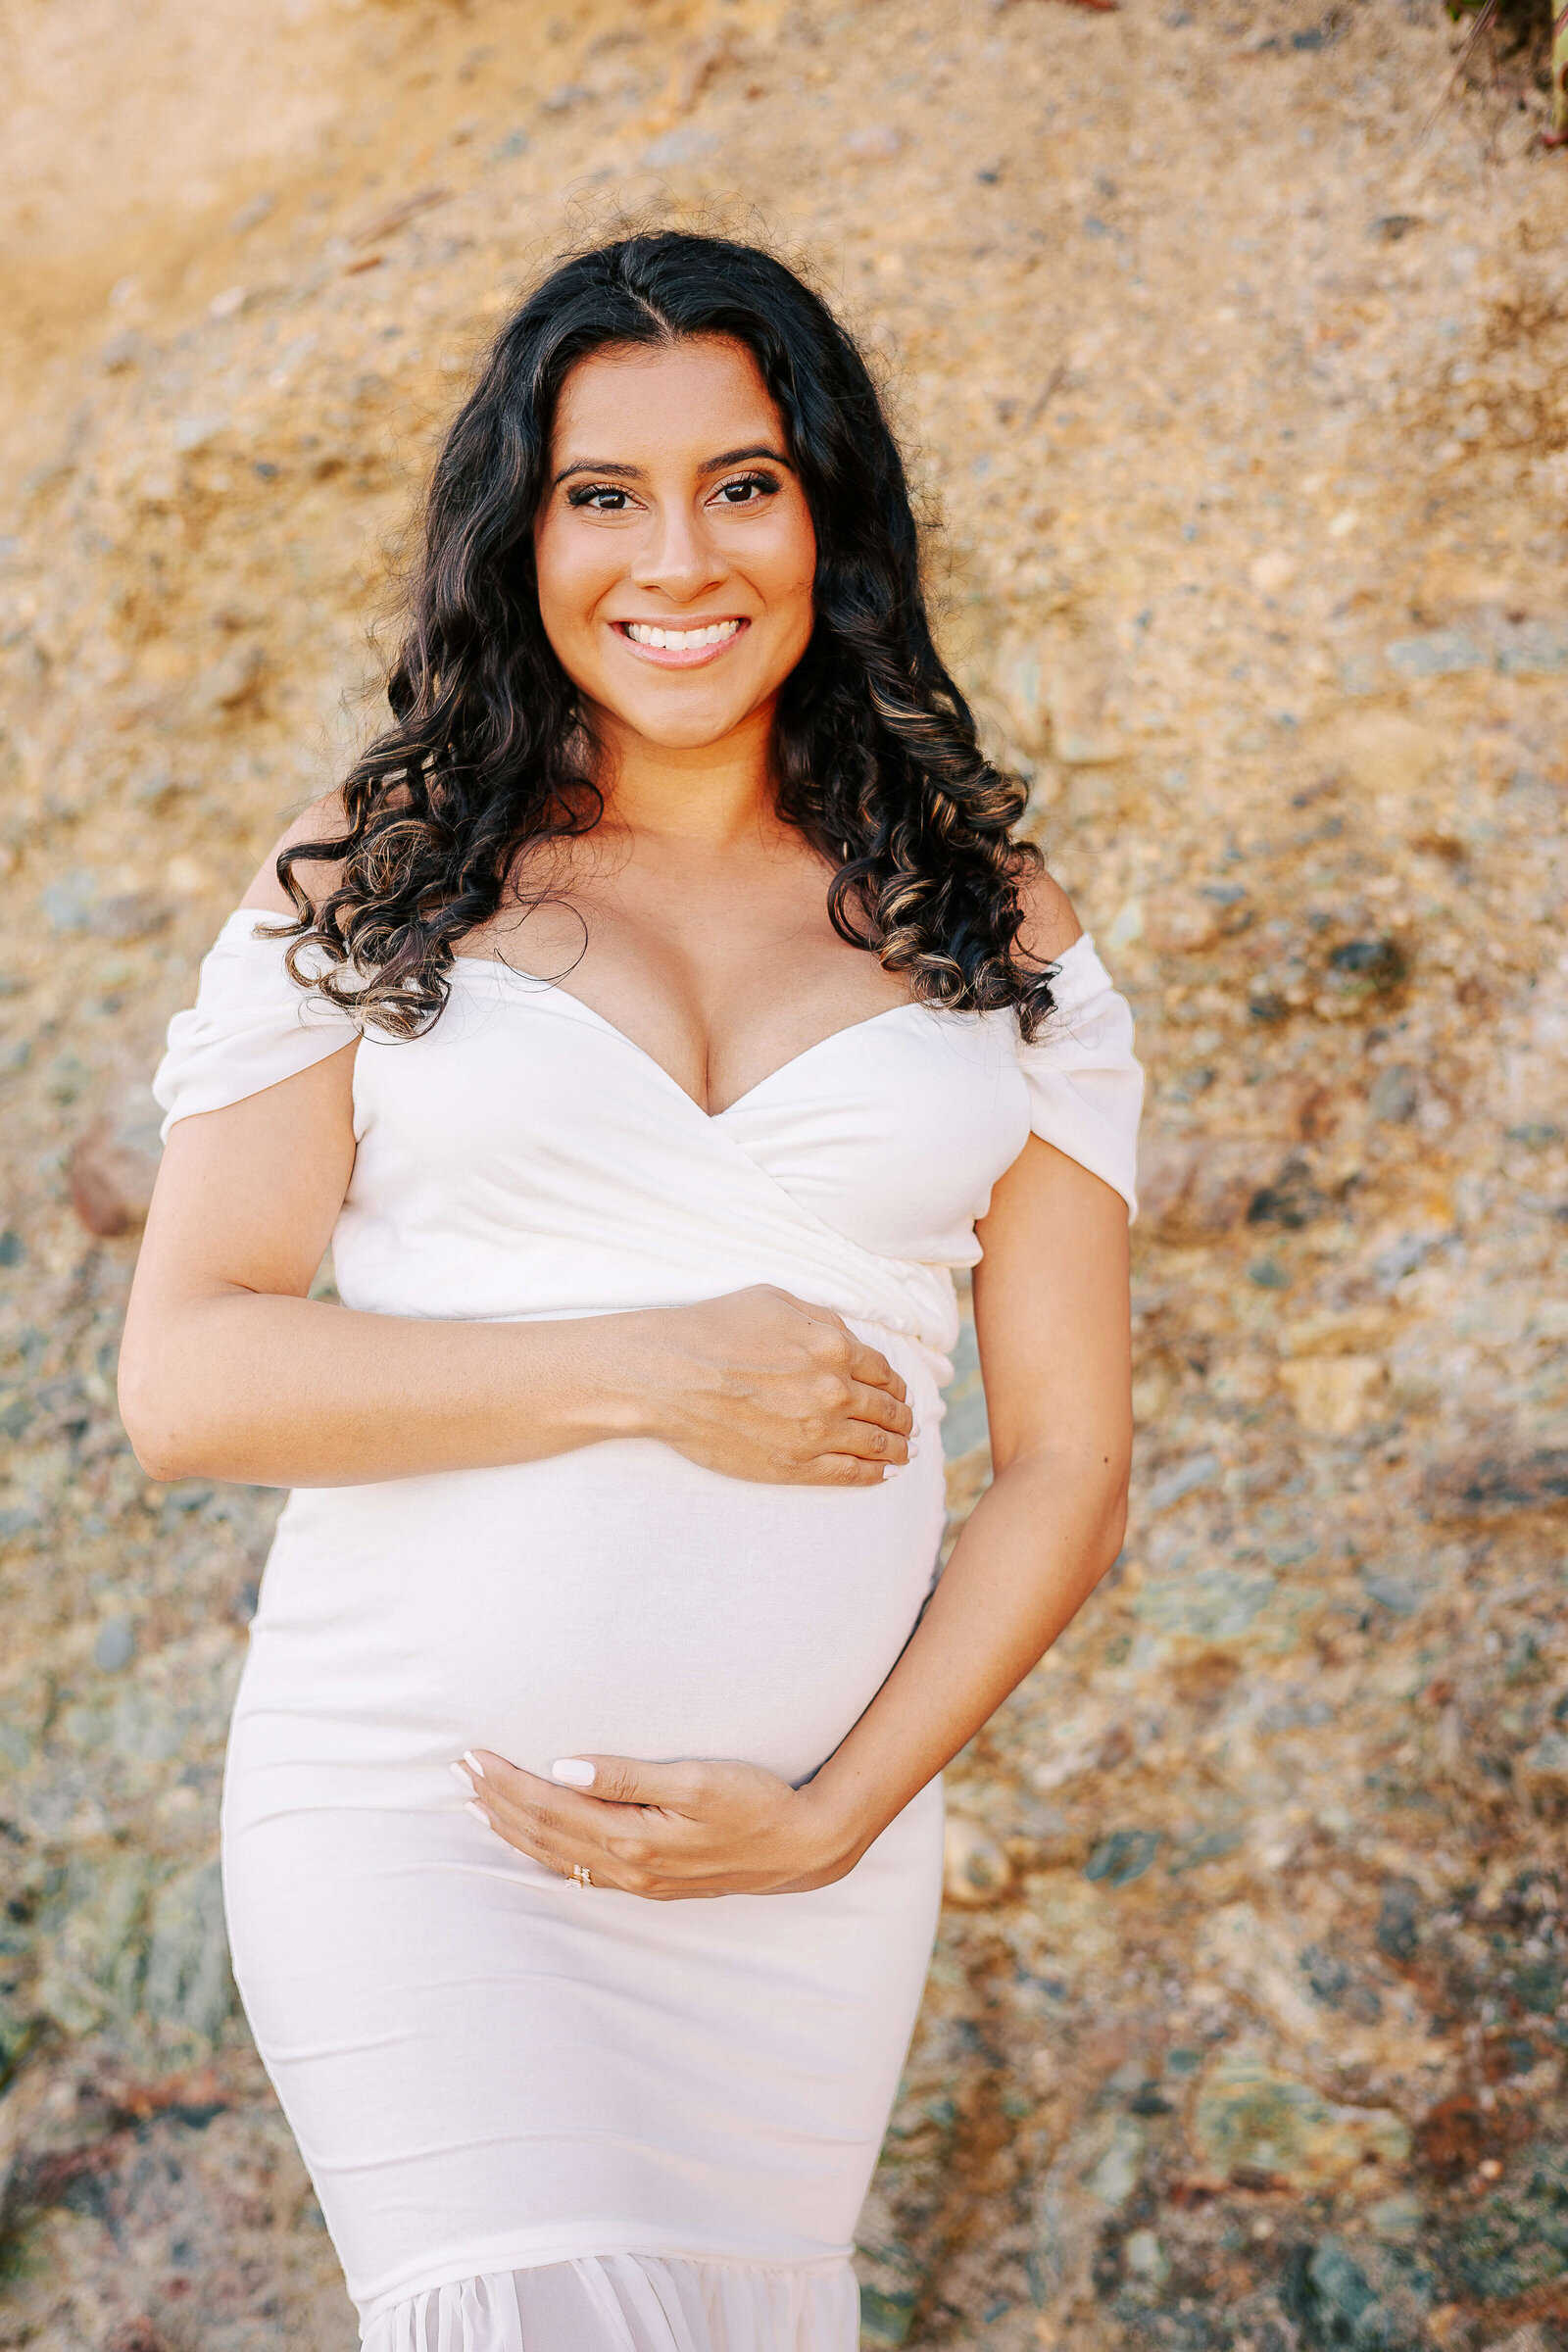 Mom holding bump at maternity session posed at rocky beach in newport beach.